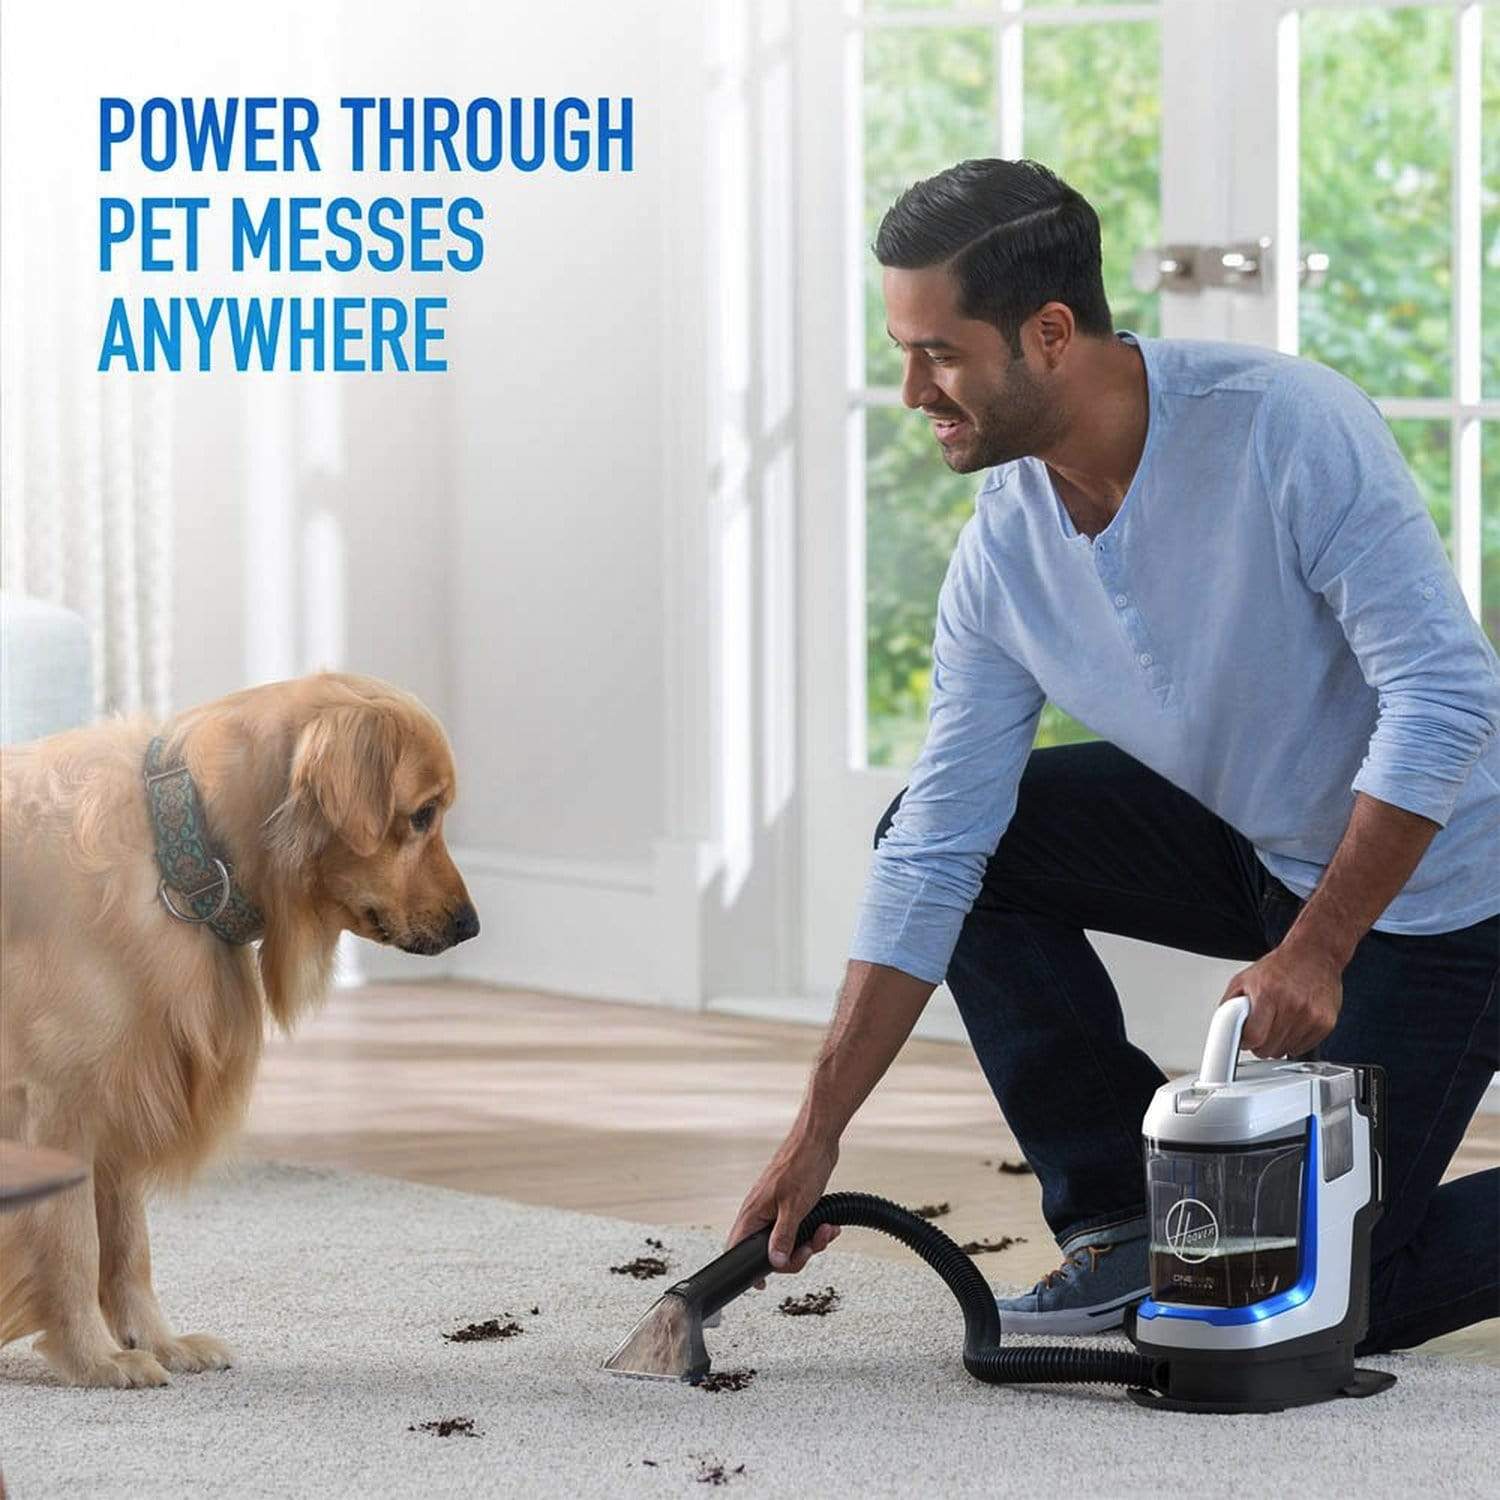 Hoover ONEPWR Spotless Go Cordless Vacuum Cleaner